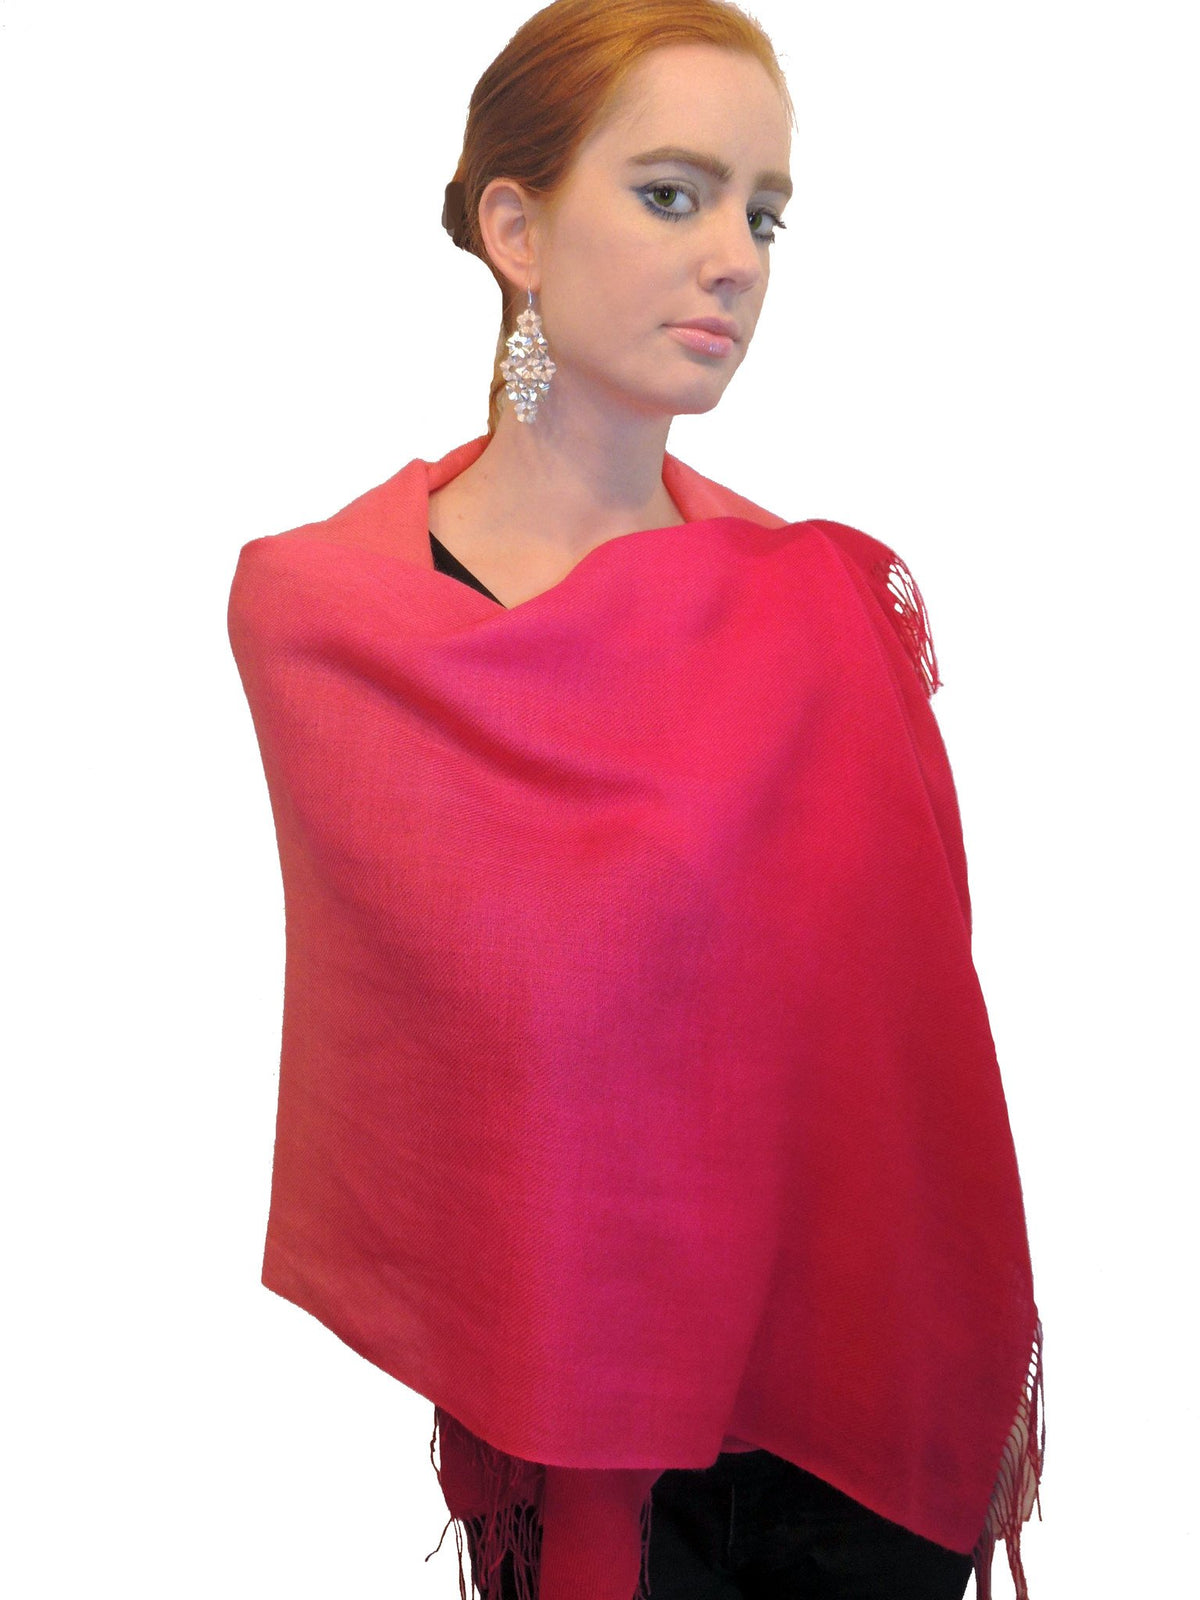 Baby Alpaca &amp; Silk Shawl Two-toned Degrade - Dip Dyed in Coral - Qinti - The Peruvian Shop